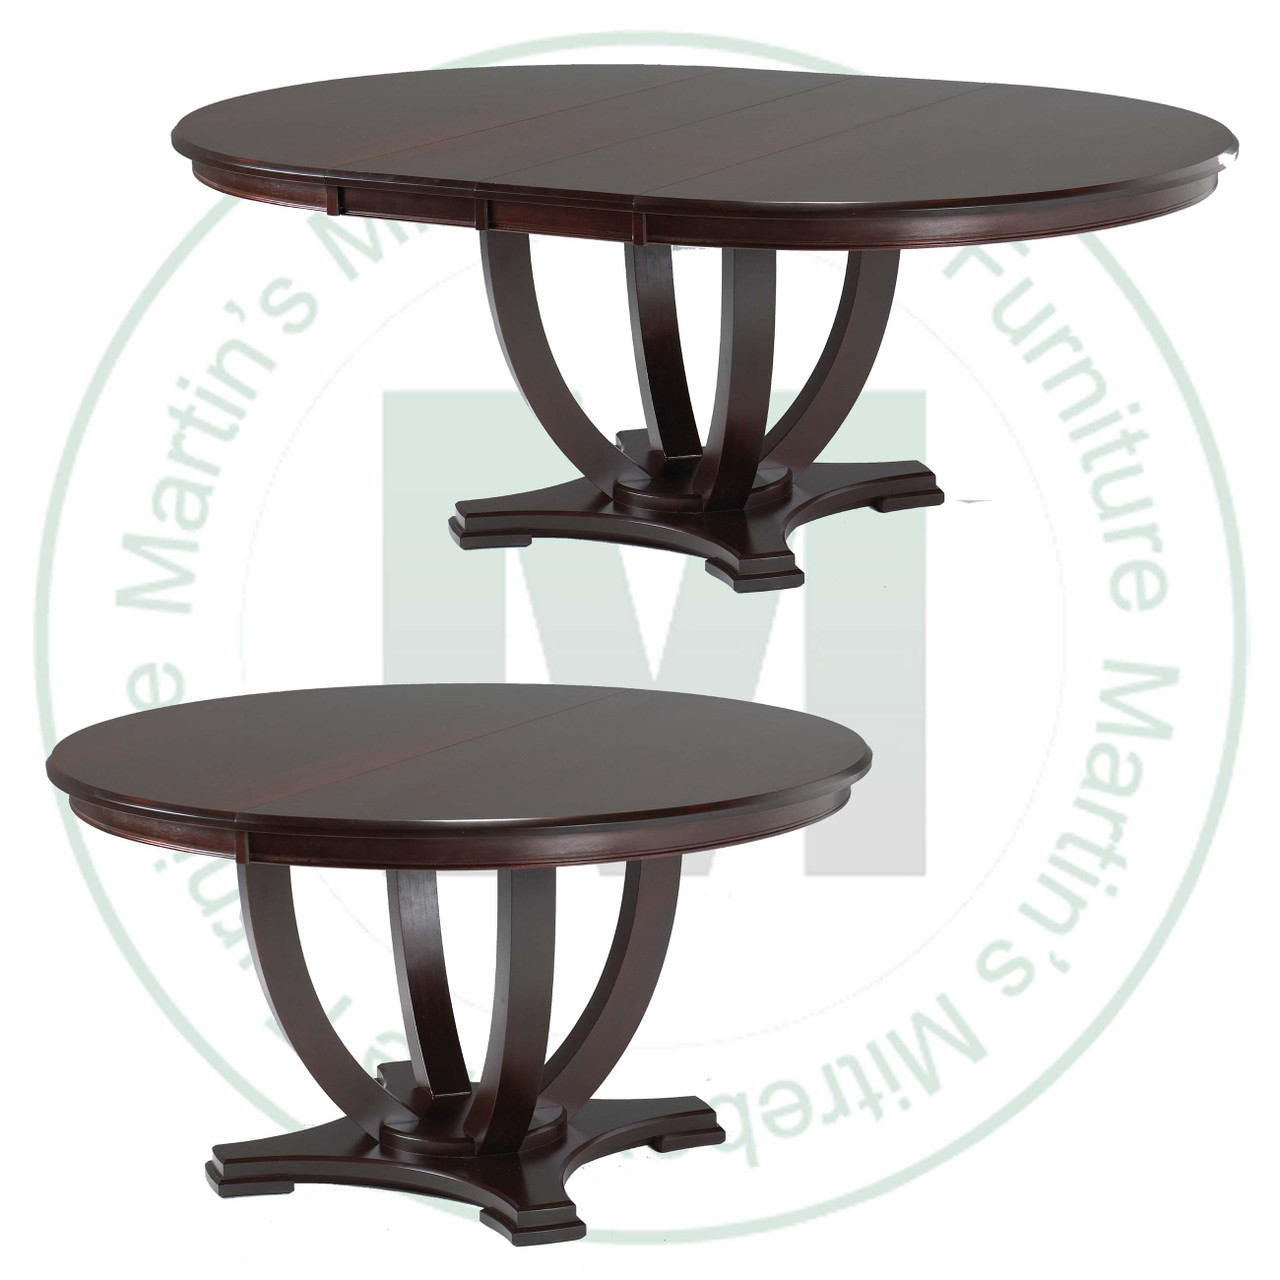 Maple Tuscany Single Pedestal Table 60''D x 60''W x 30''H With 2 - 12'' Leaves